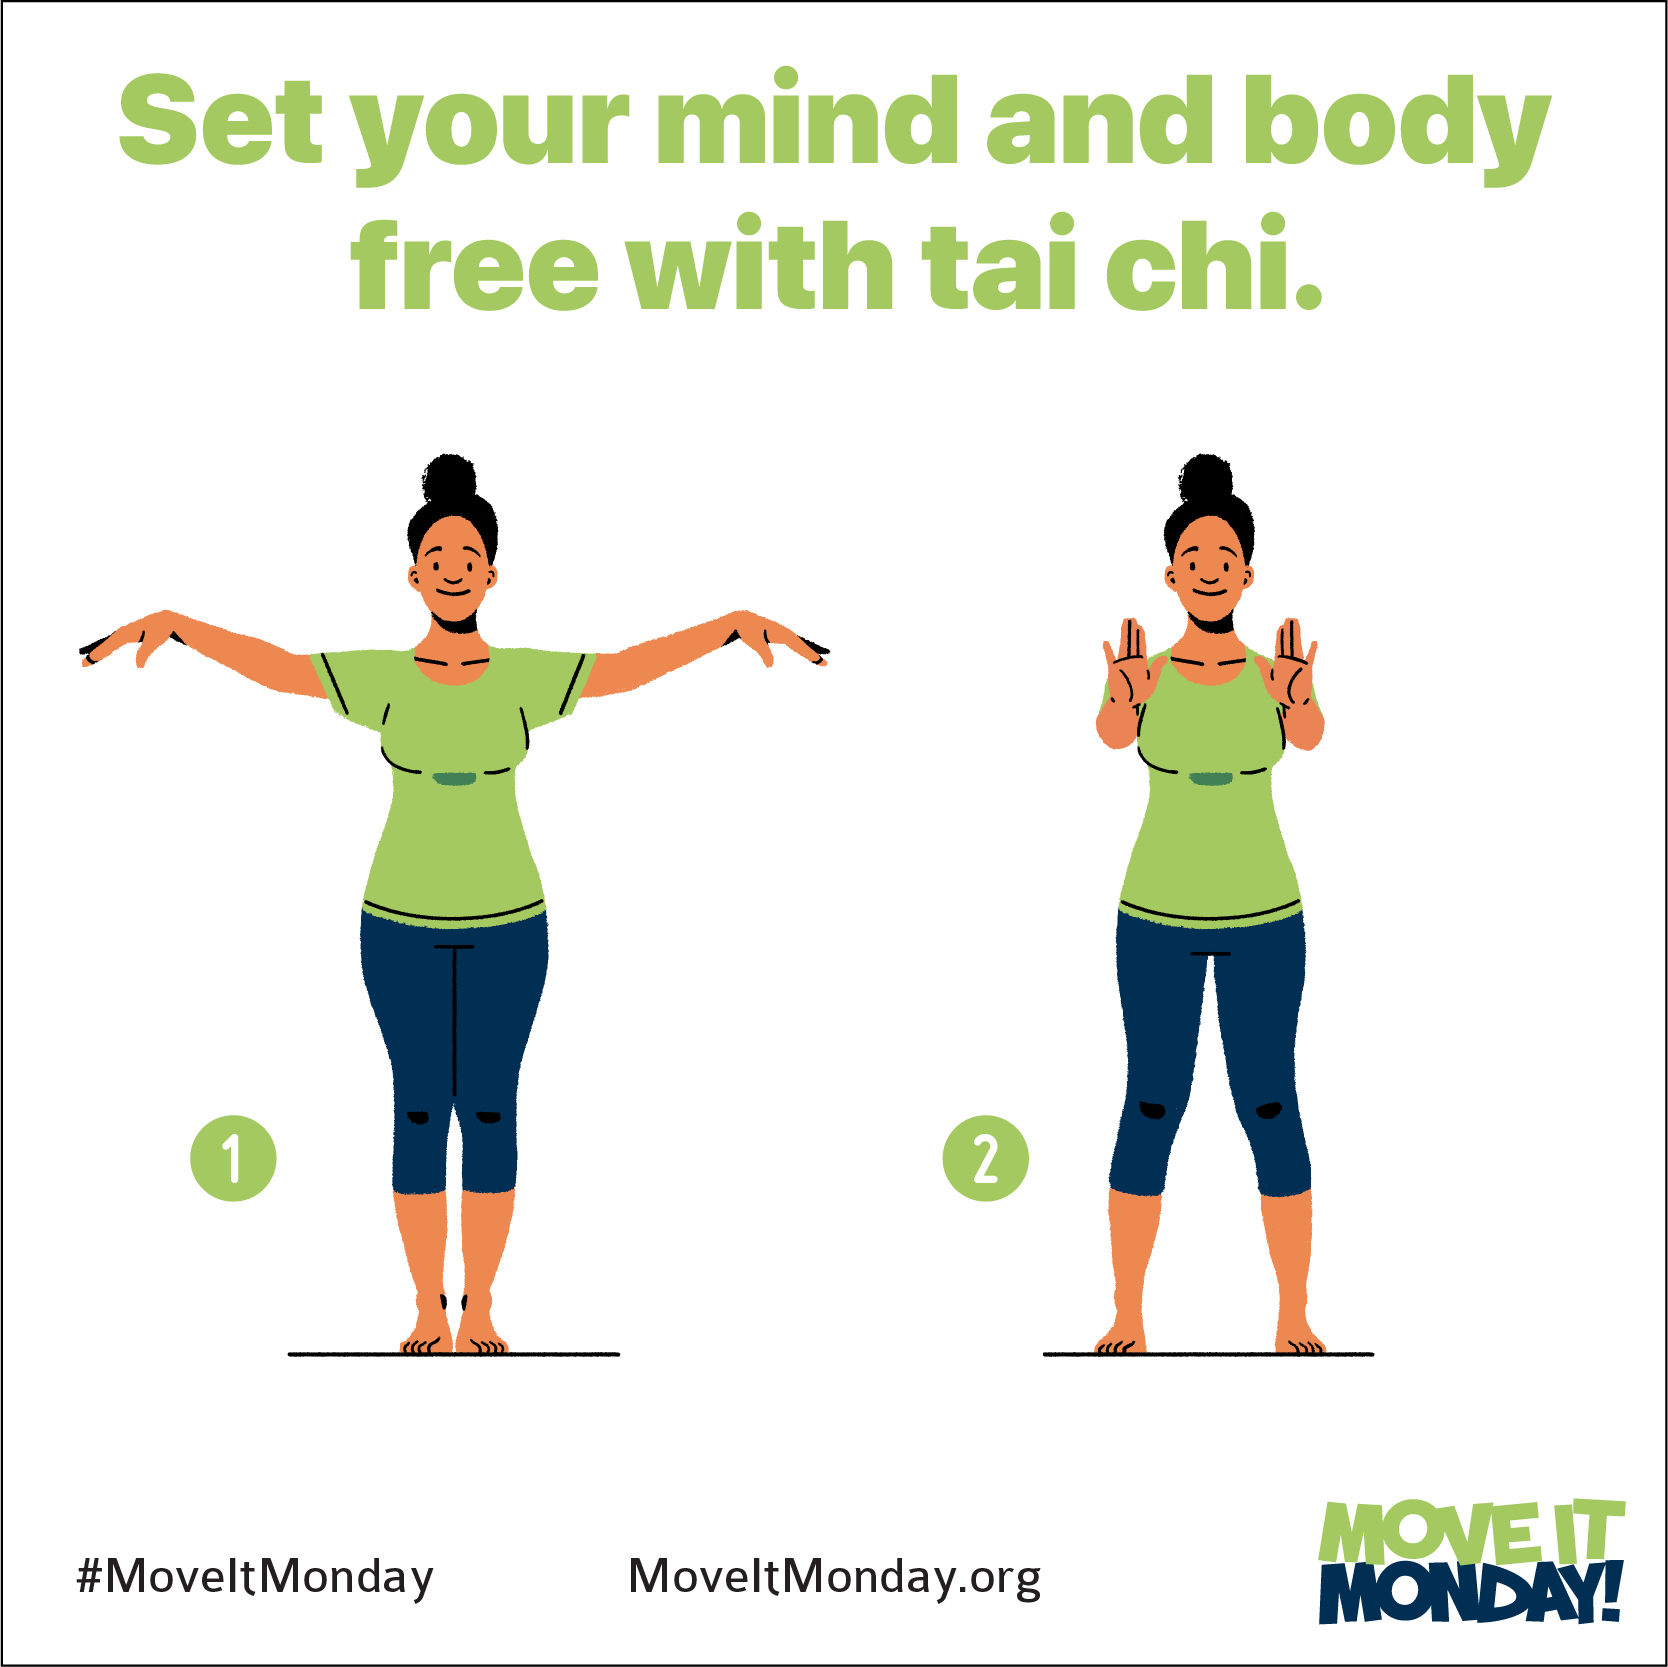 Exercise the body and mind with tai chi